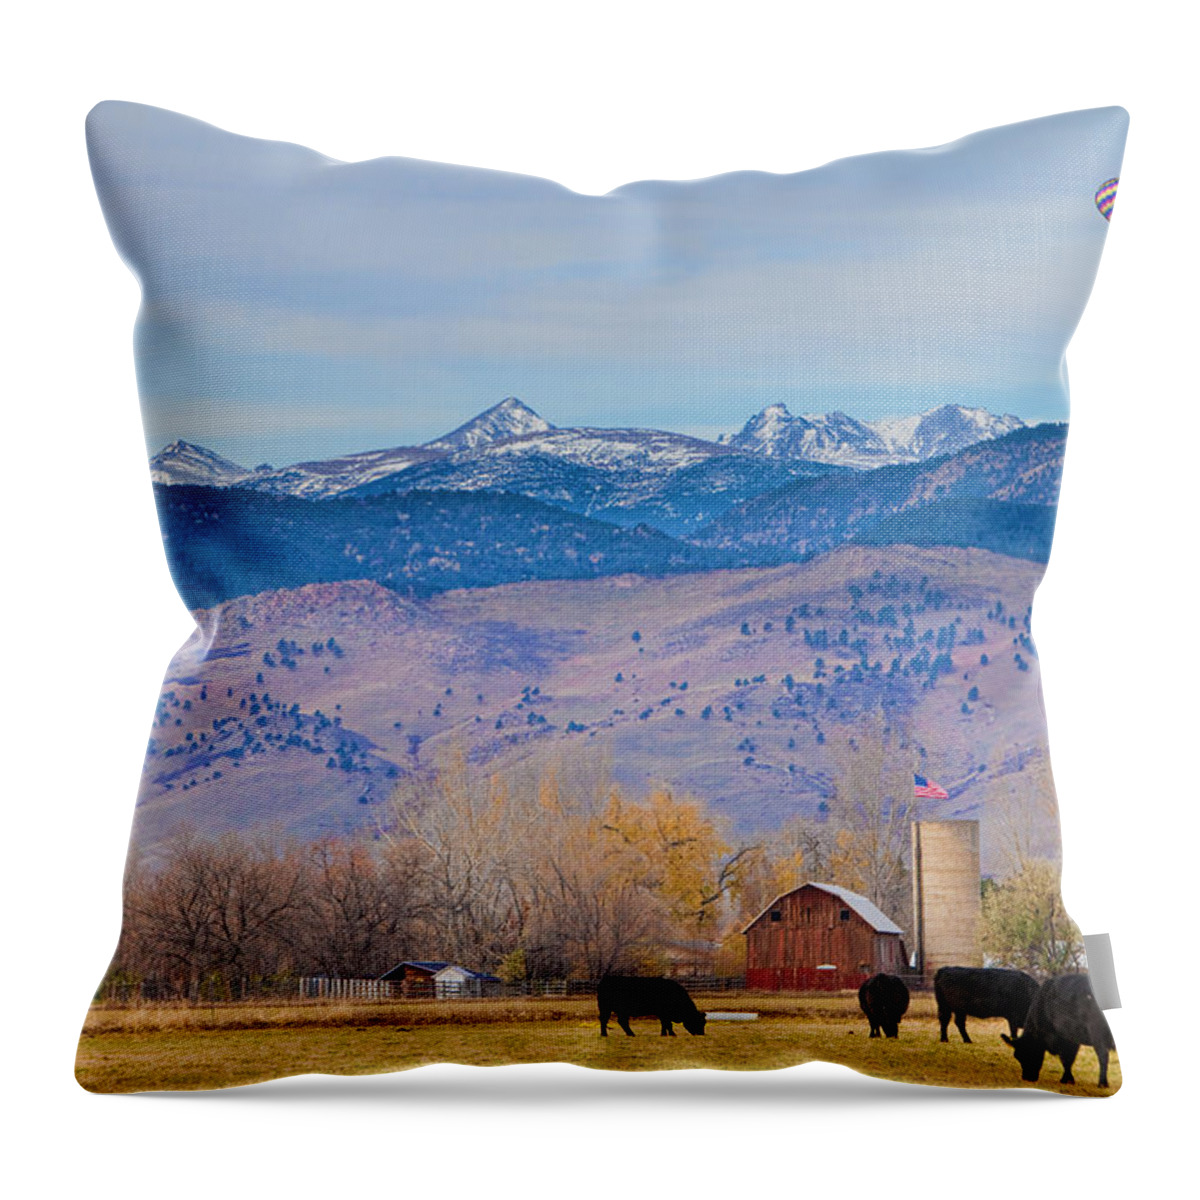 'hot Air Balloon' Throw Pillow featuring the photograph Hot Air Balloon Rocky Mountain Country View by James BO Insogna